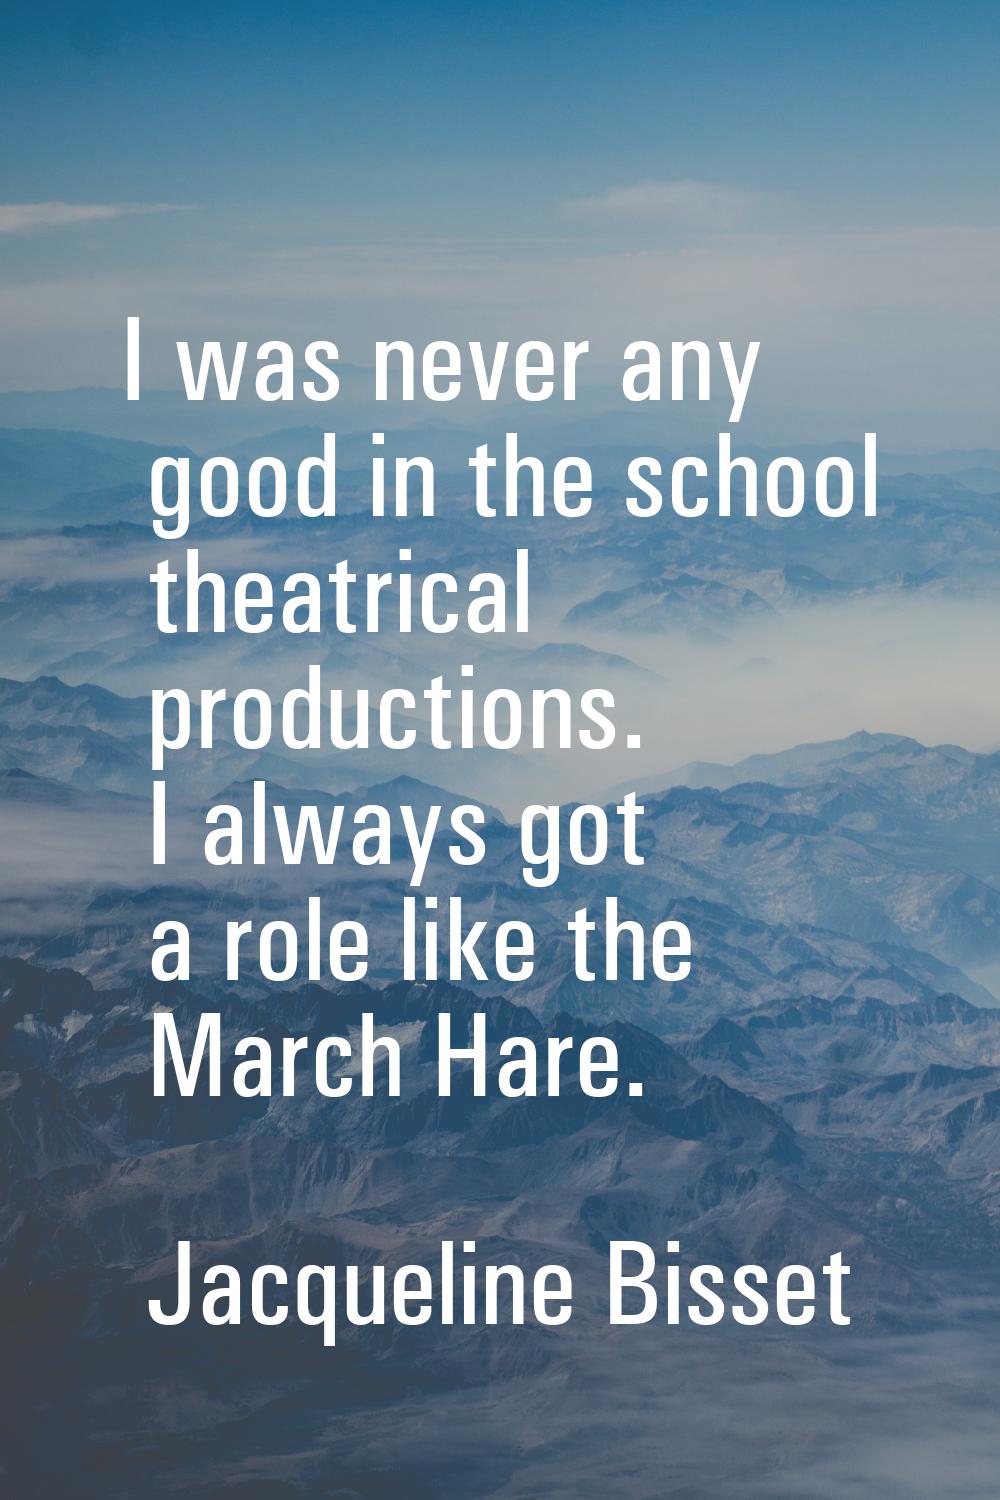 I was never any good in the school theatrical productions. I always got a role like the March Hare.